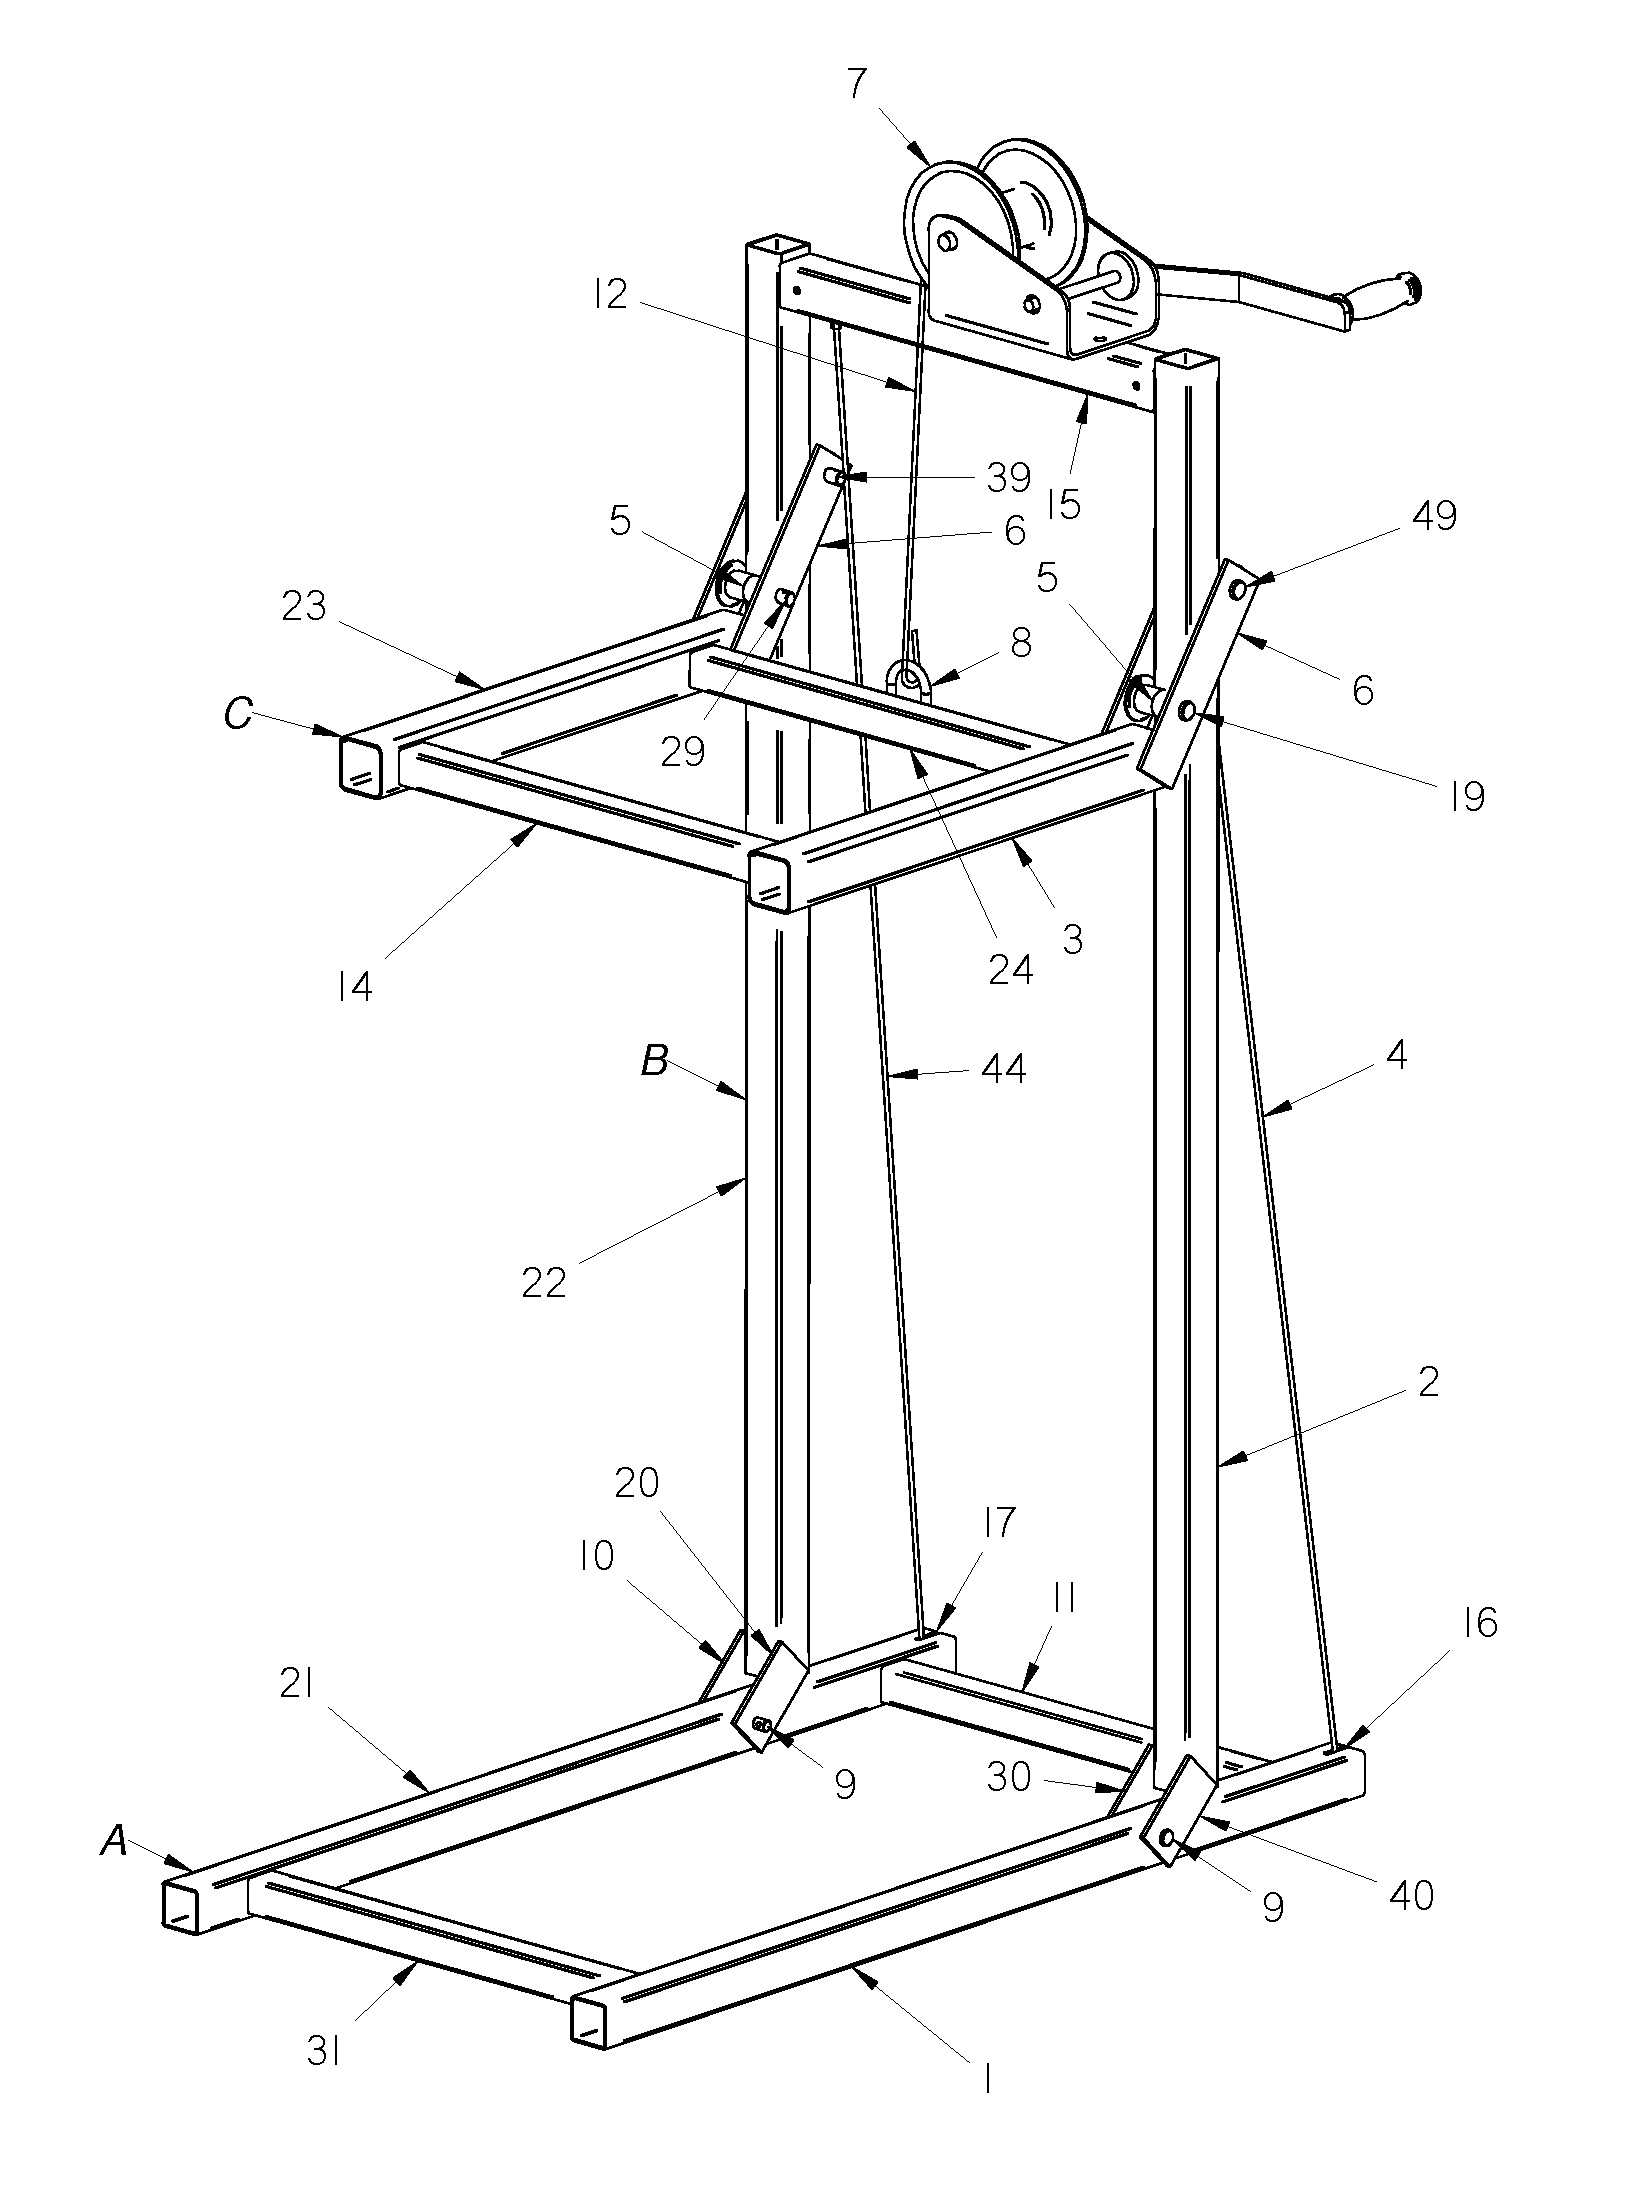 Game lifting apparatus and method of use